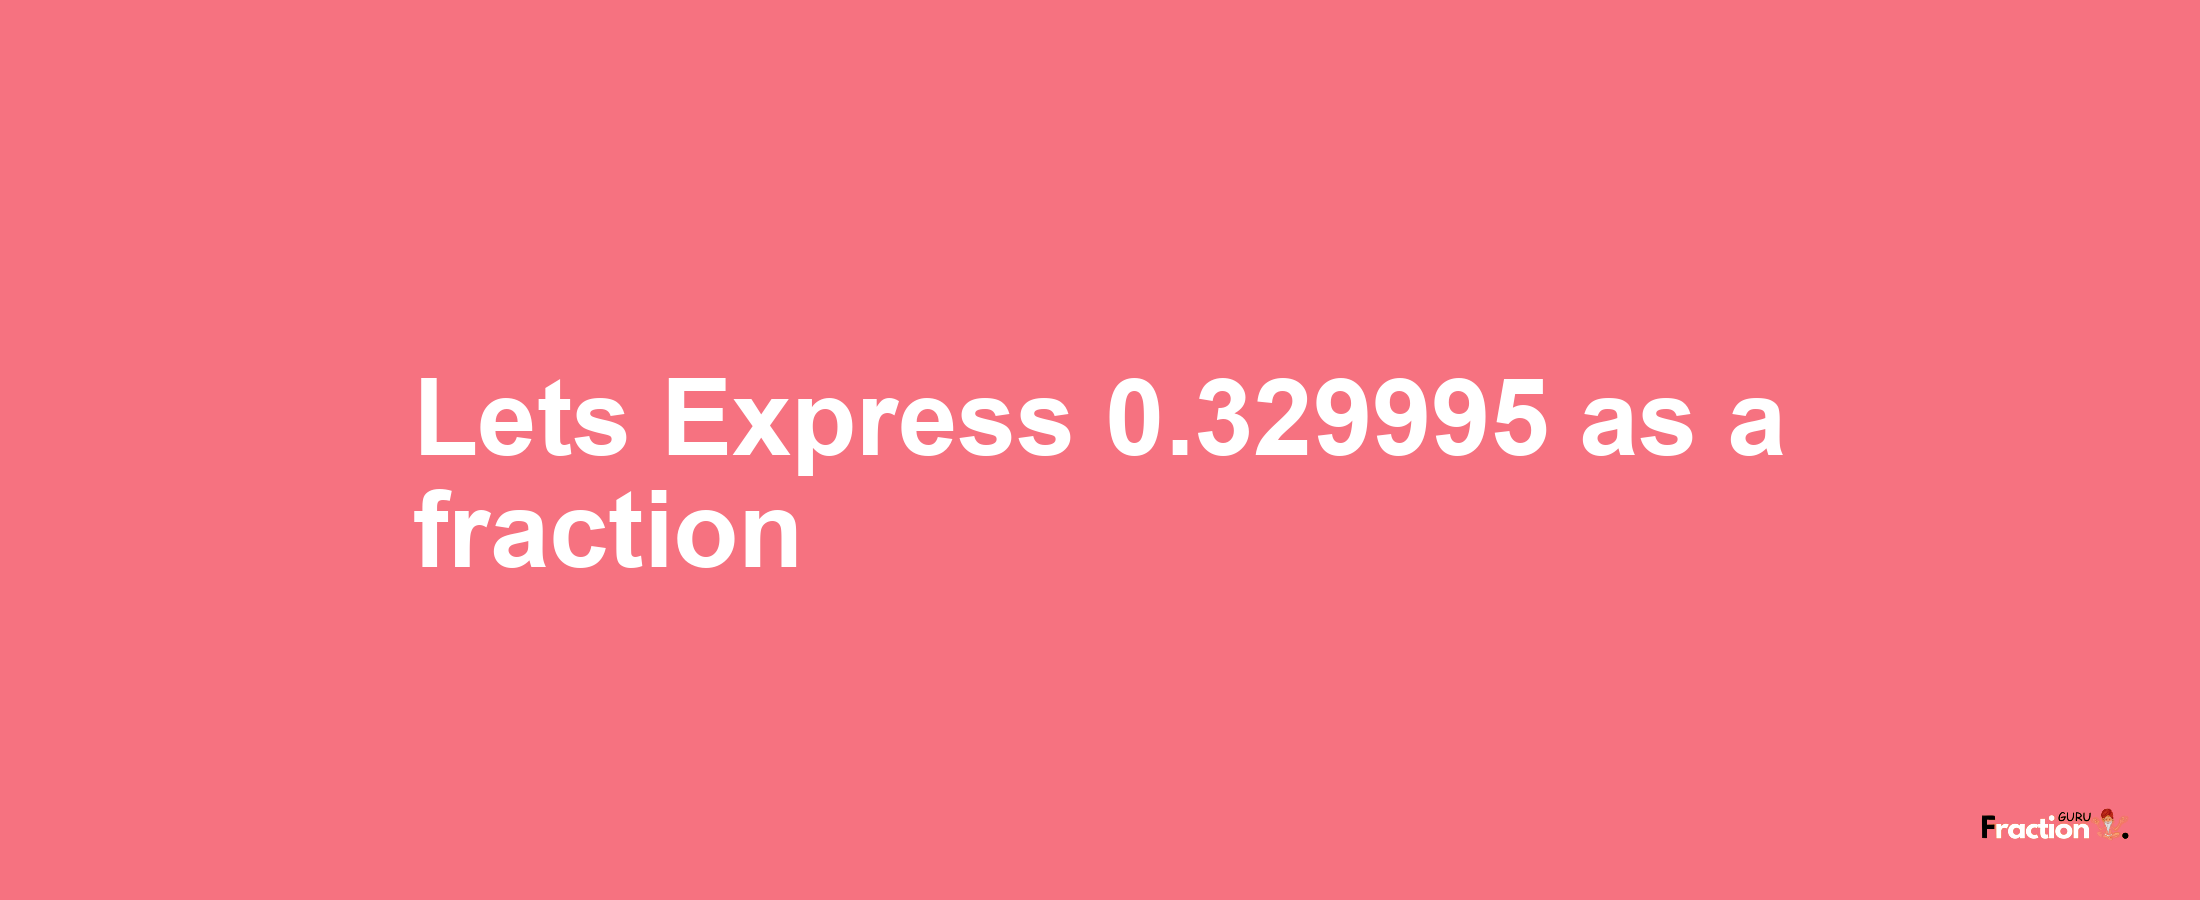 Lets Express 0.329995 as afraction